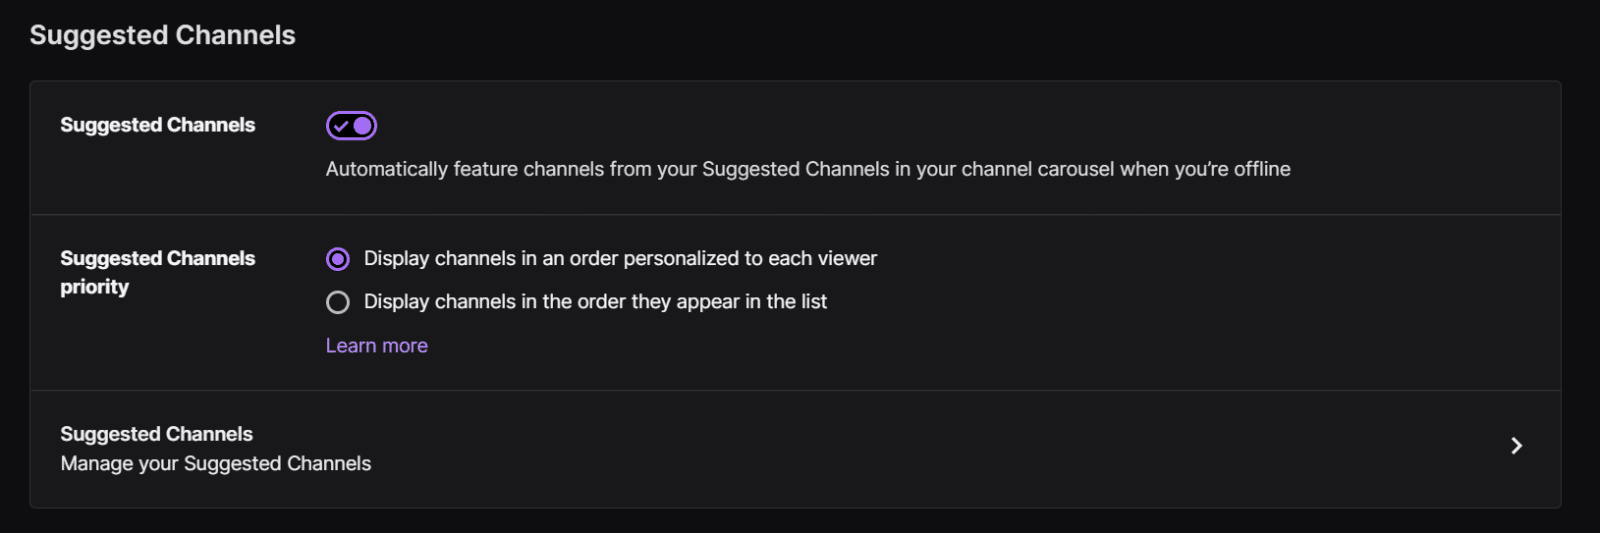 suggested channels